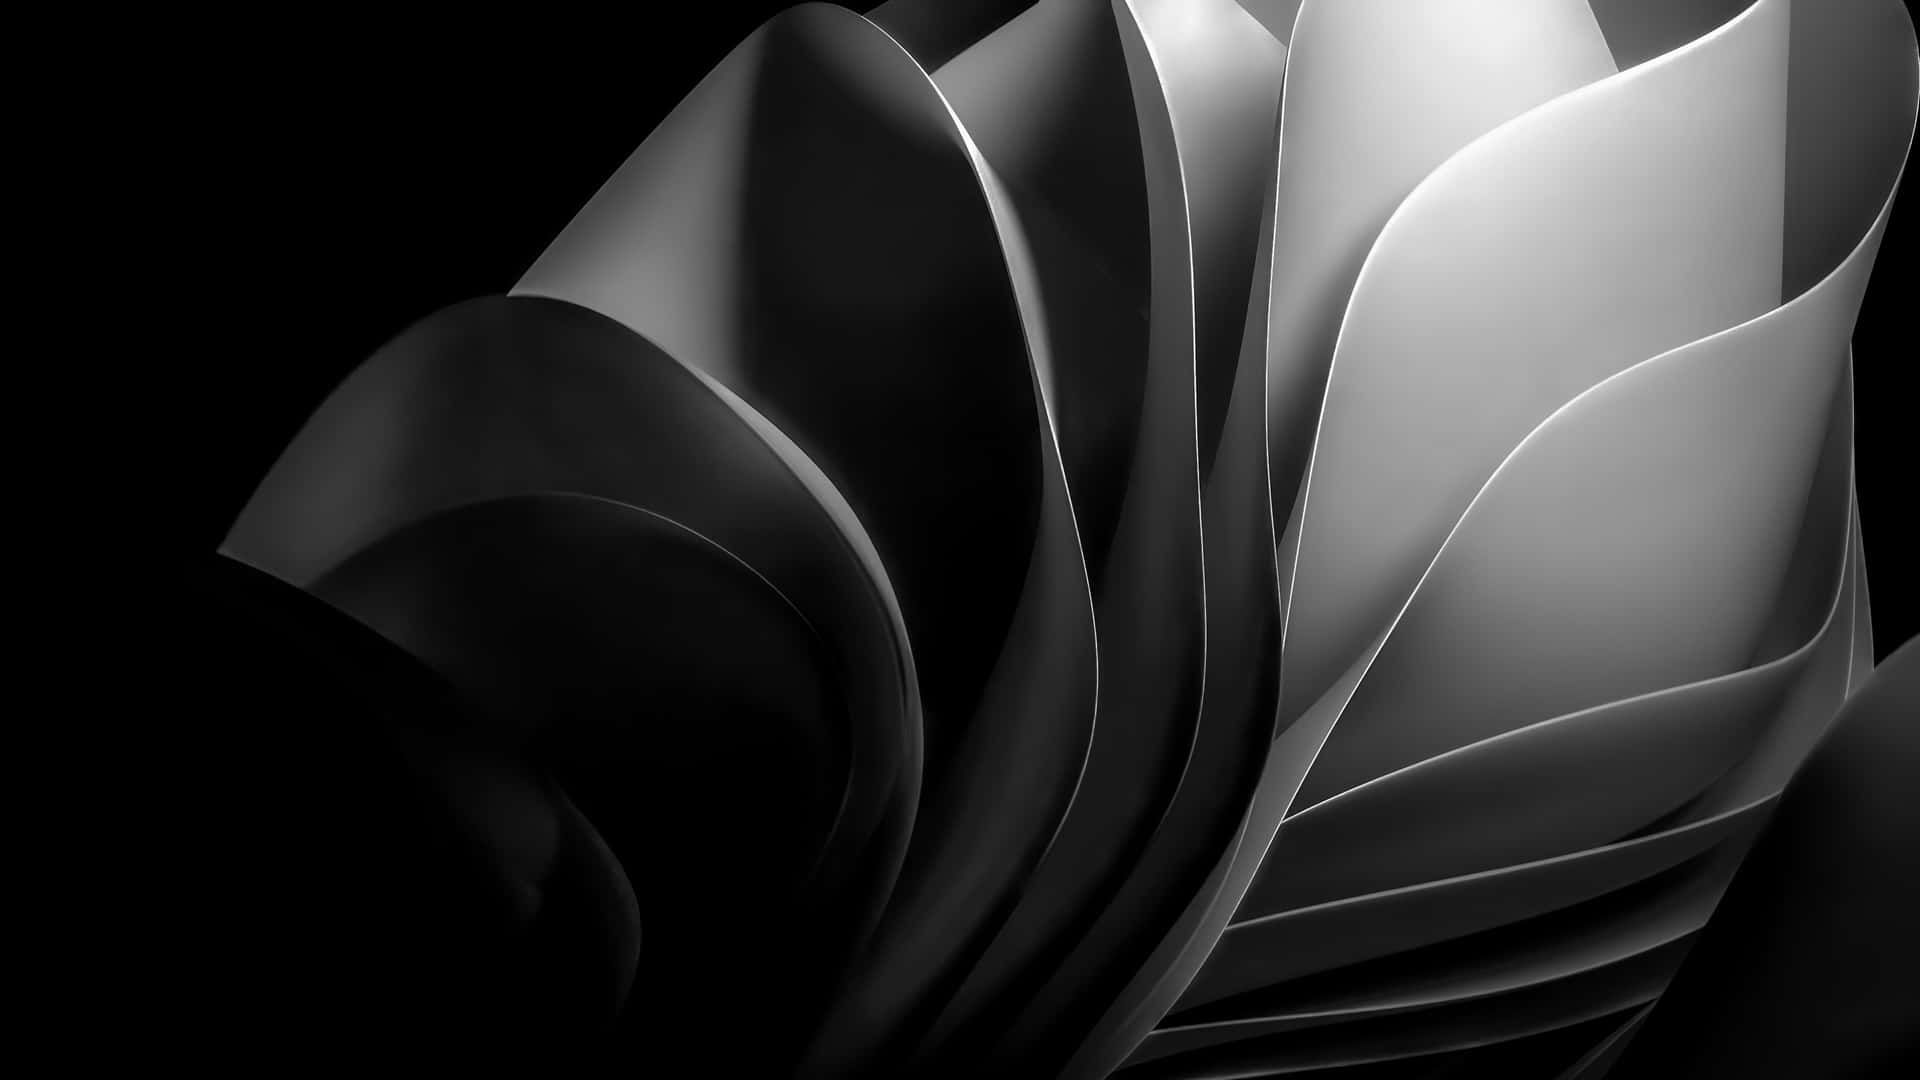 Monochrome Flowing Origami Background